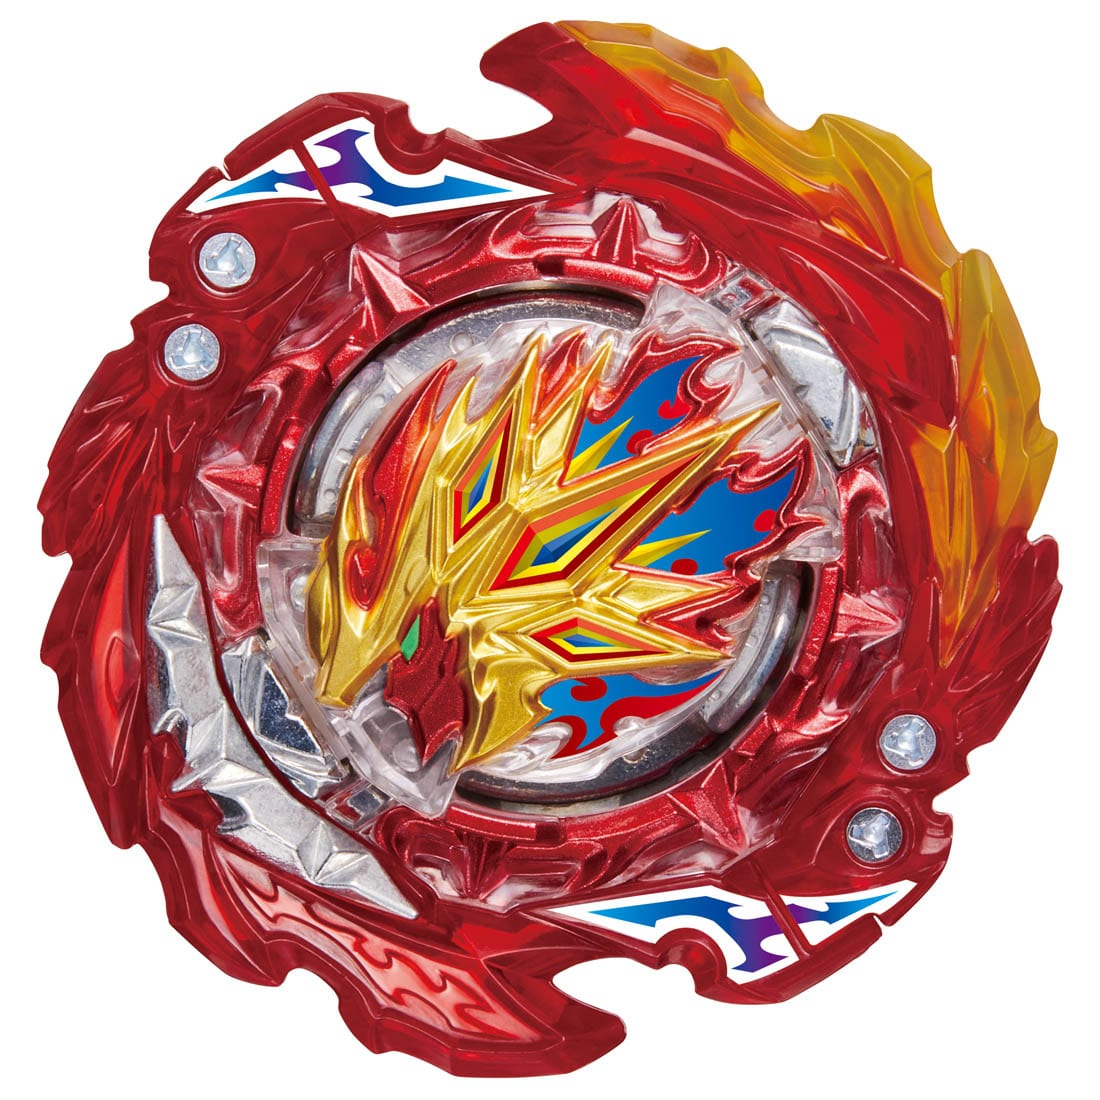 STOCK -Beyblade Burst Ultimate Super Hyperion MR.Tp.Xp-2 + Hel – Mall of Beys Official Store of Beyblade by Zankye